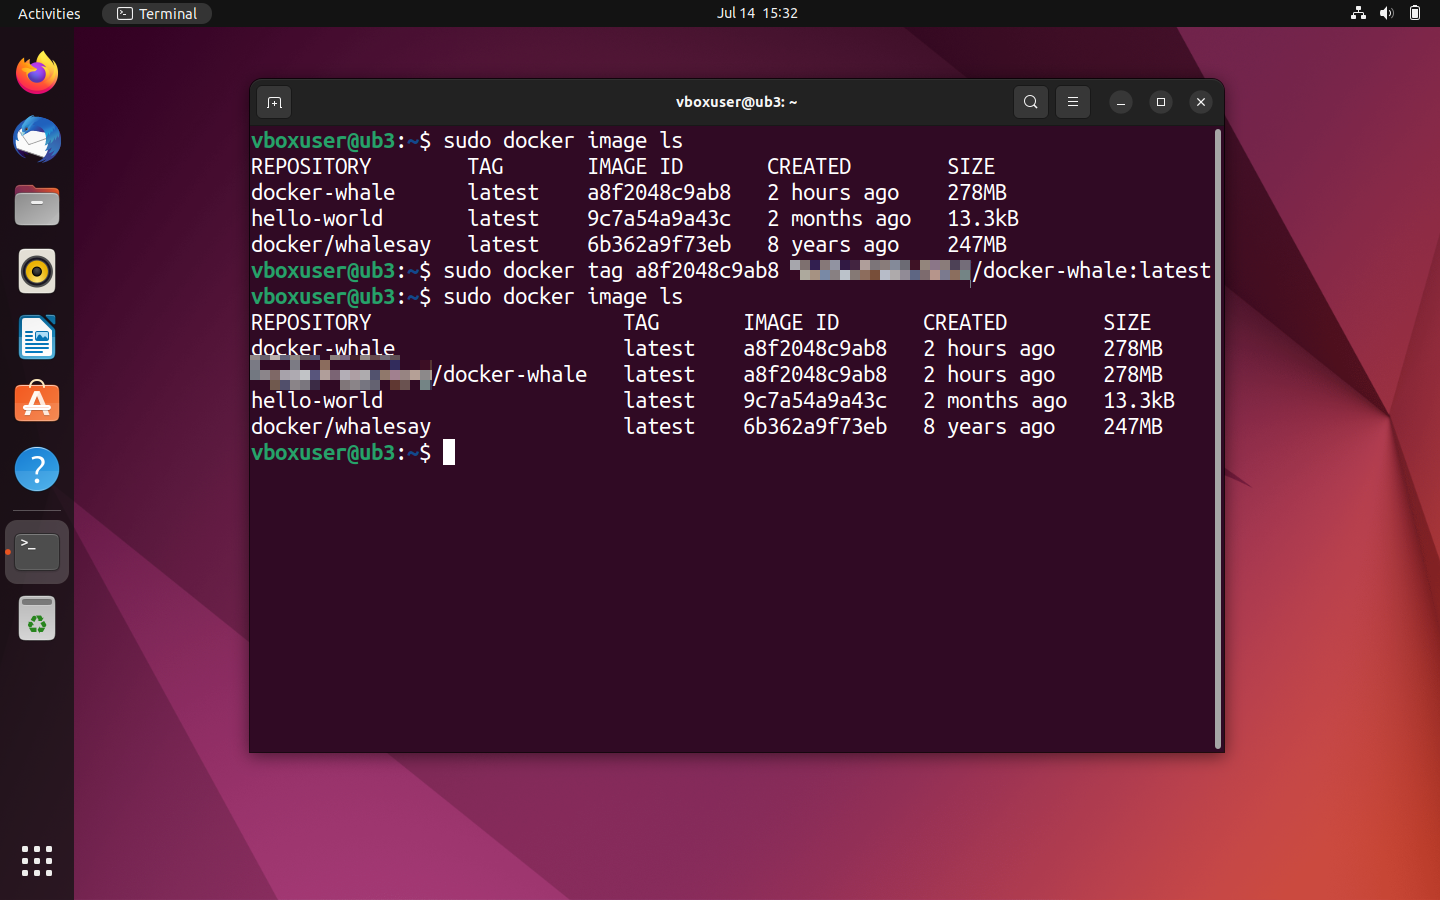 Ubuntu terminal: Image overview before and after tagging